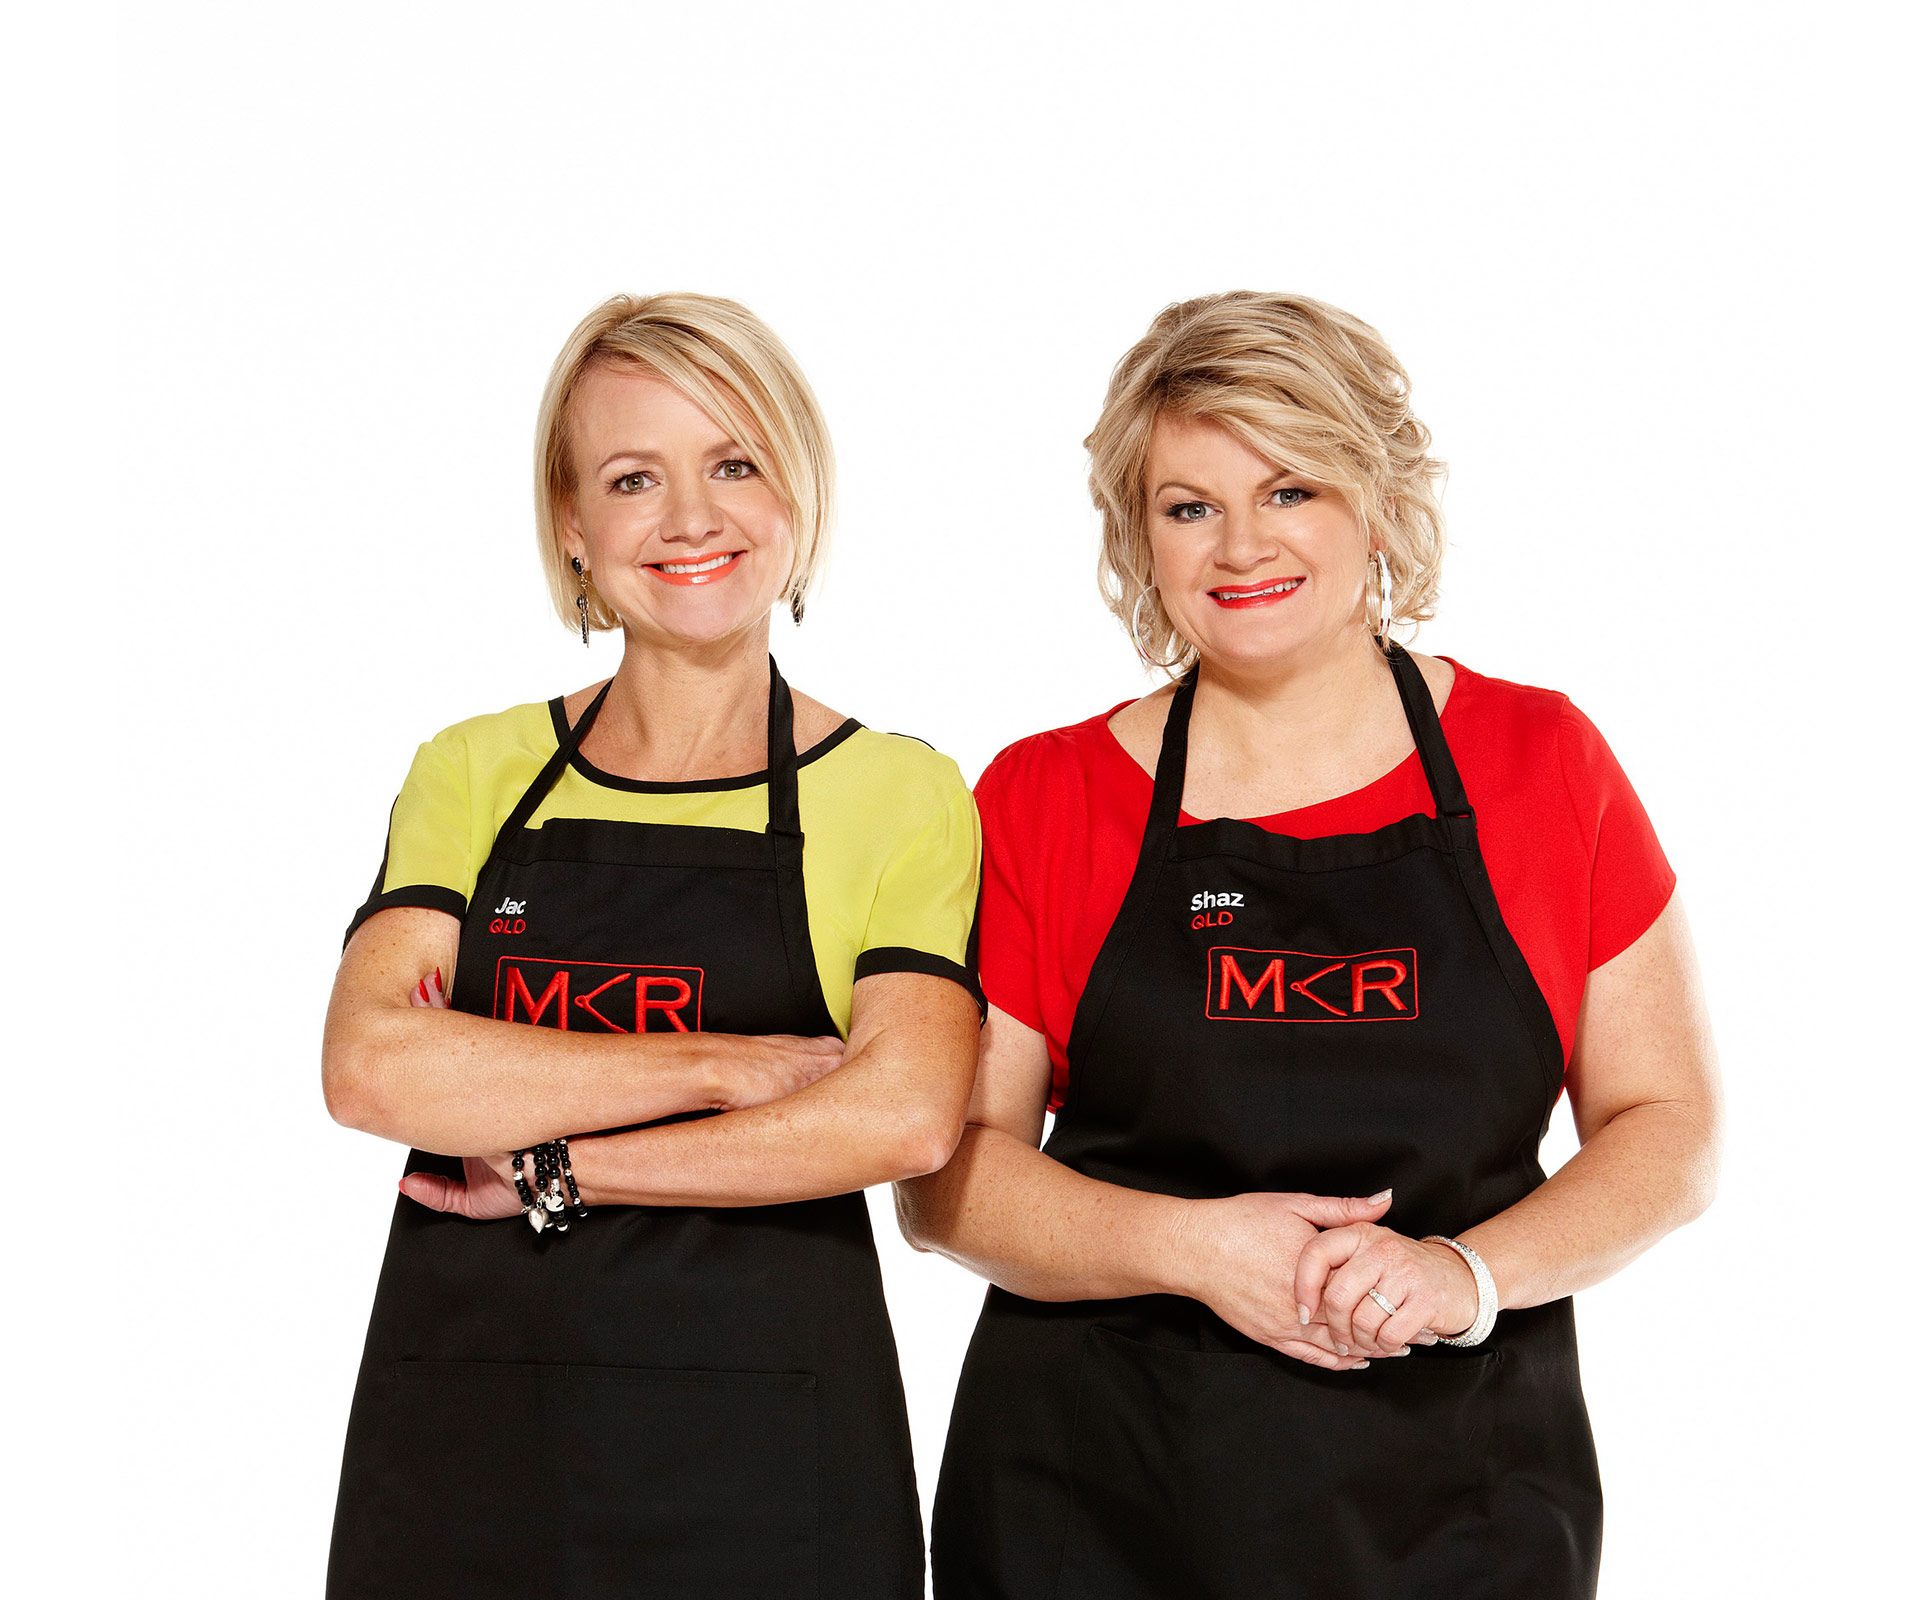 My Kitchen Rules: The secret lives of Jac and Shaz